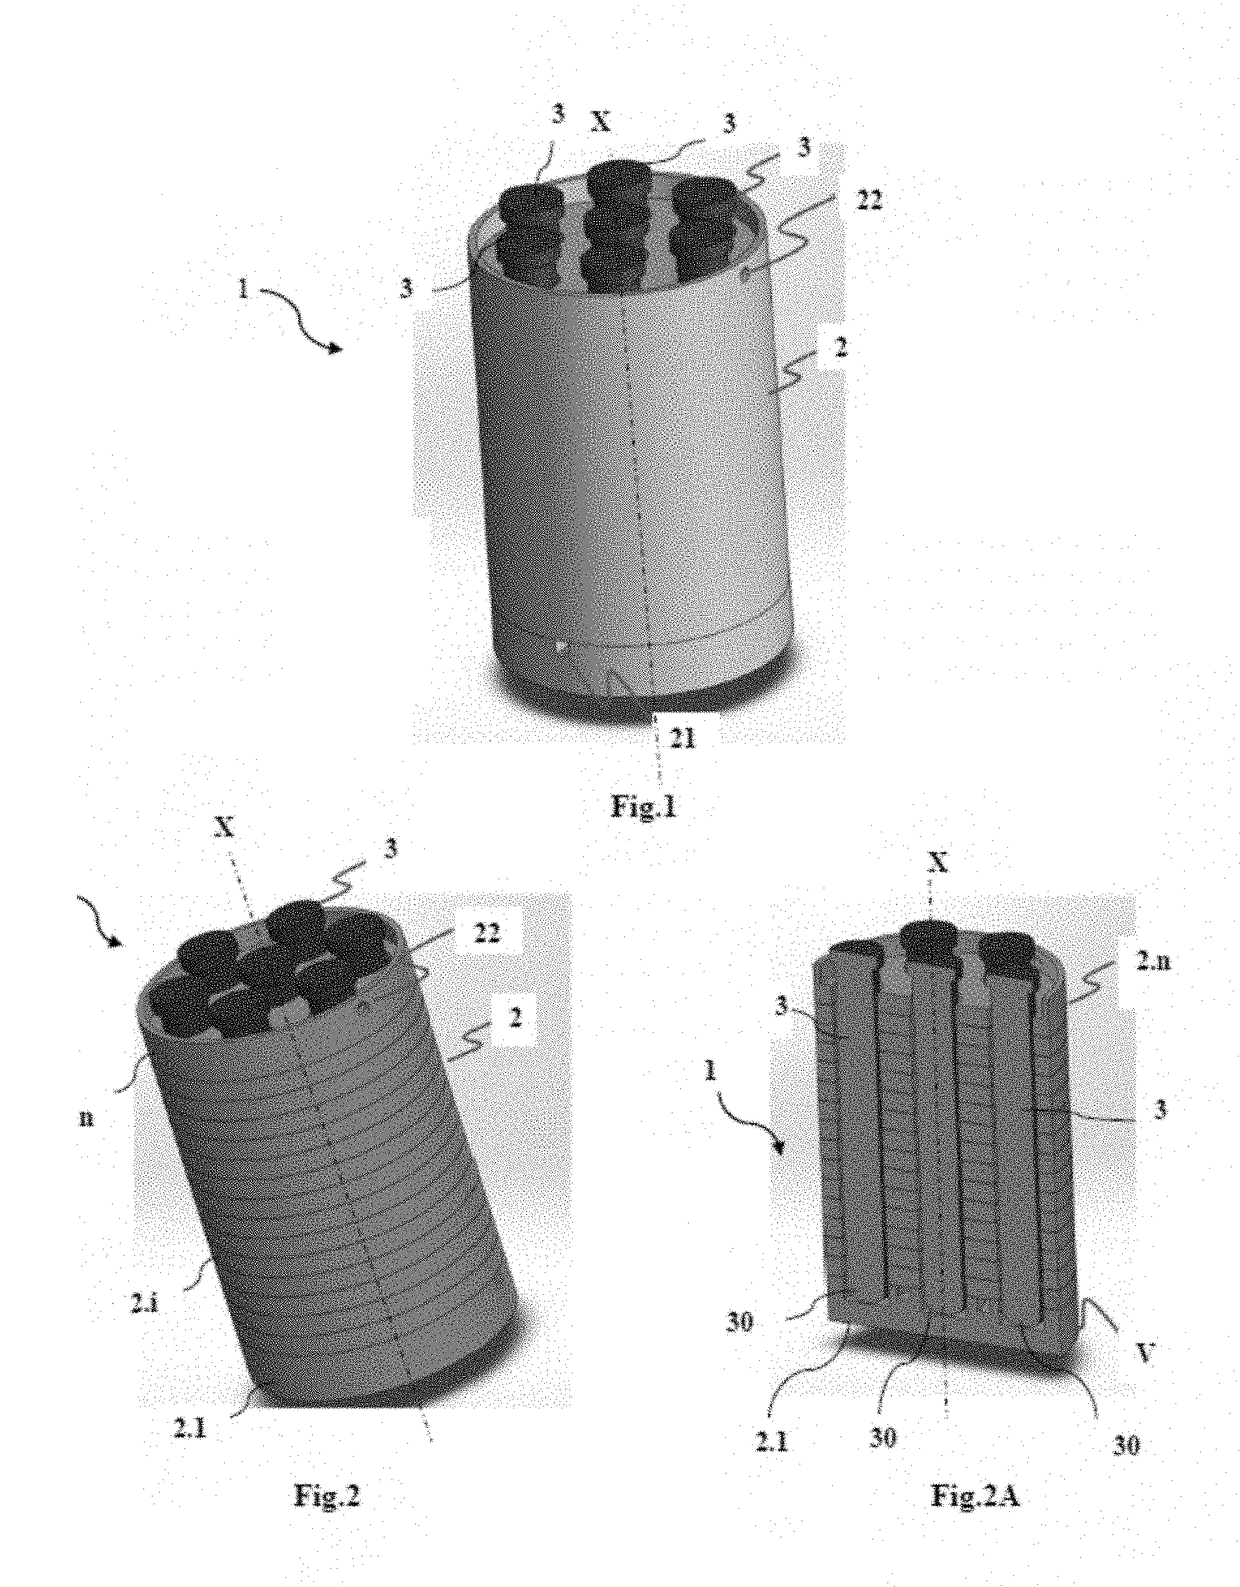 Hydrogen storage tank produced from a thermally insulating material forming cylindrical casings containing hydrides